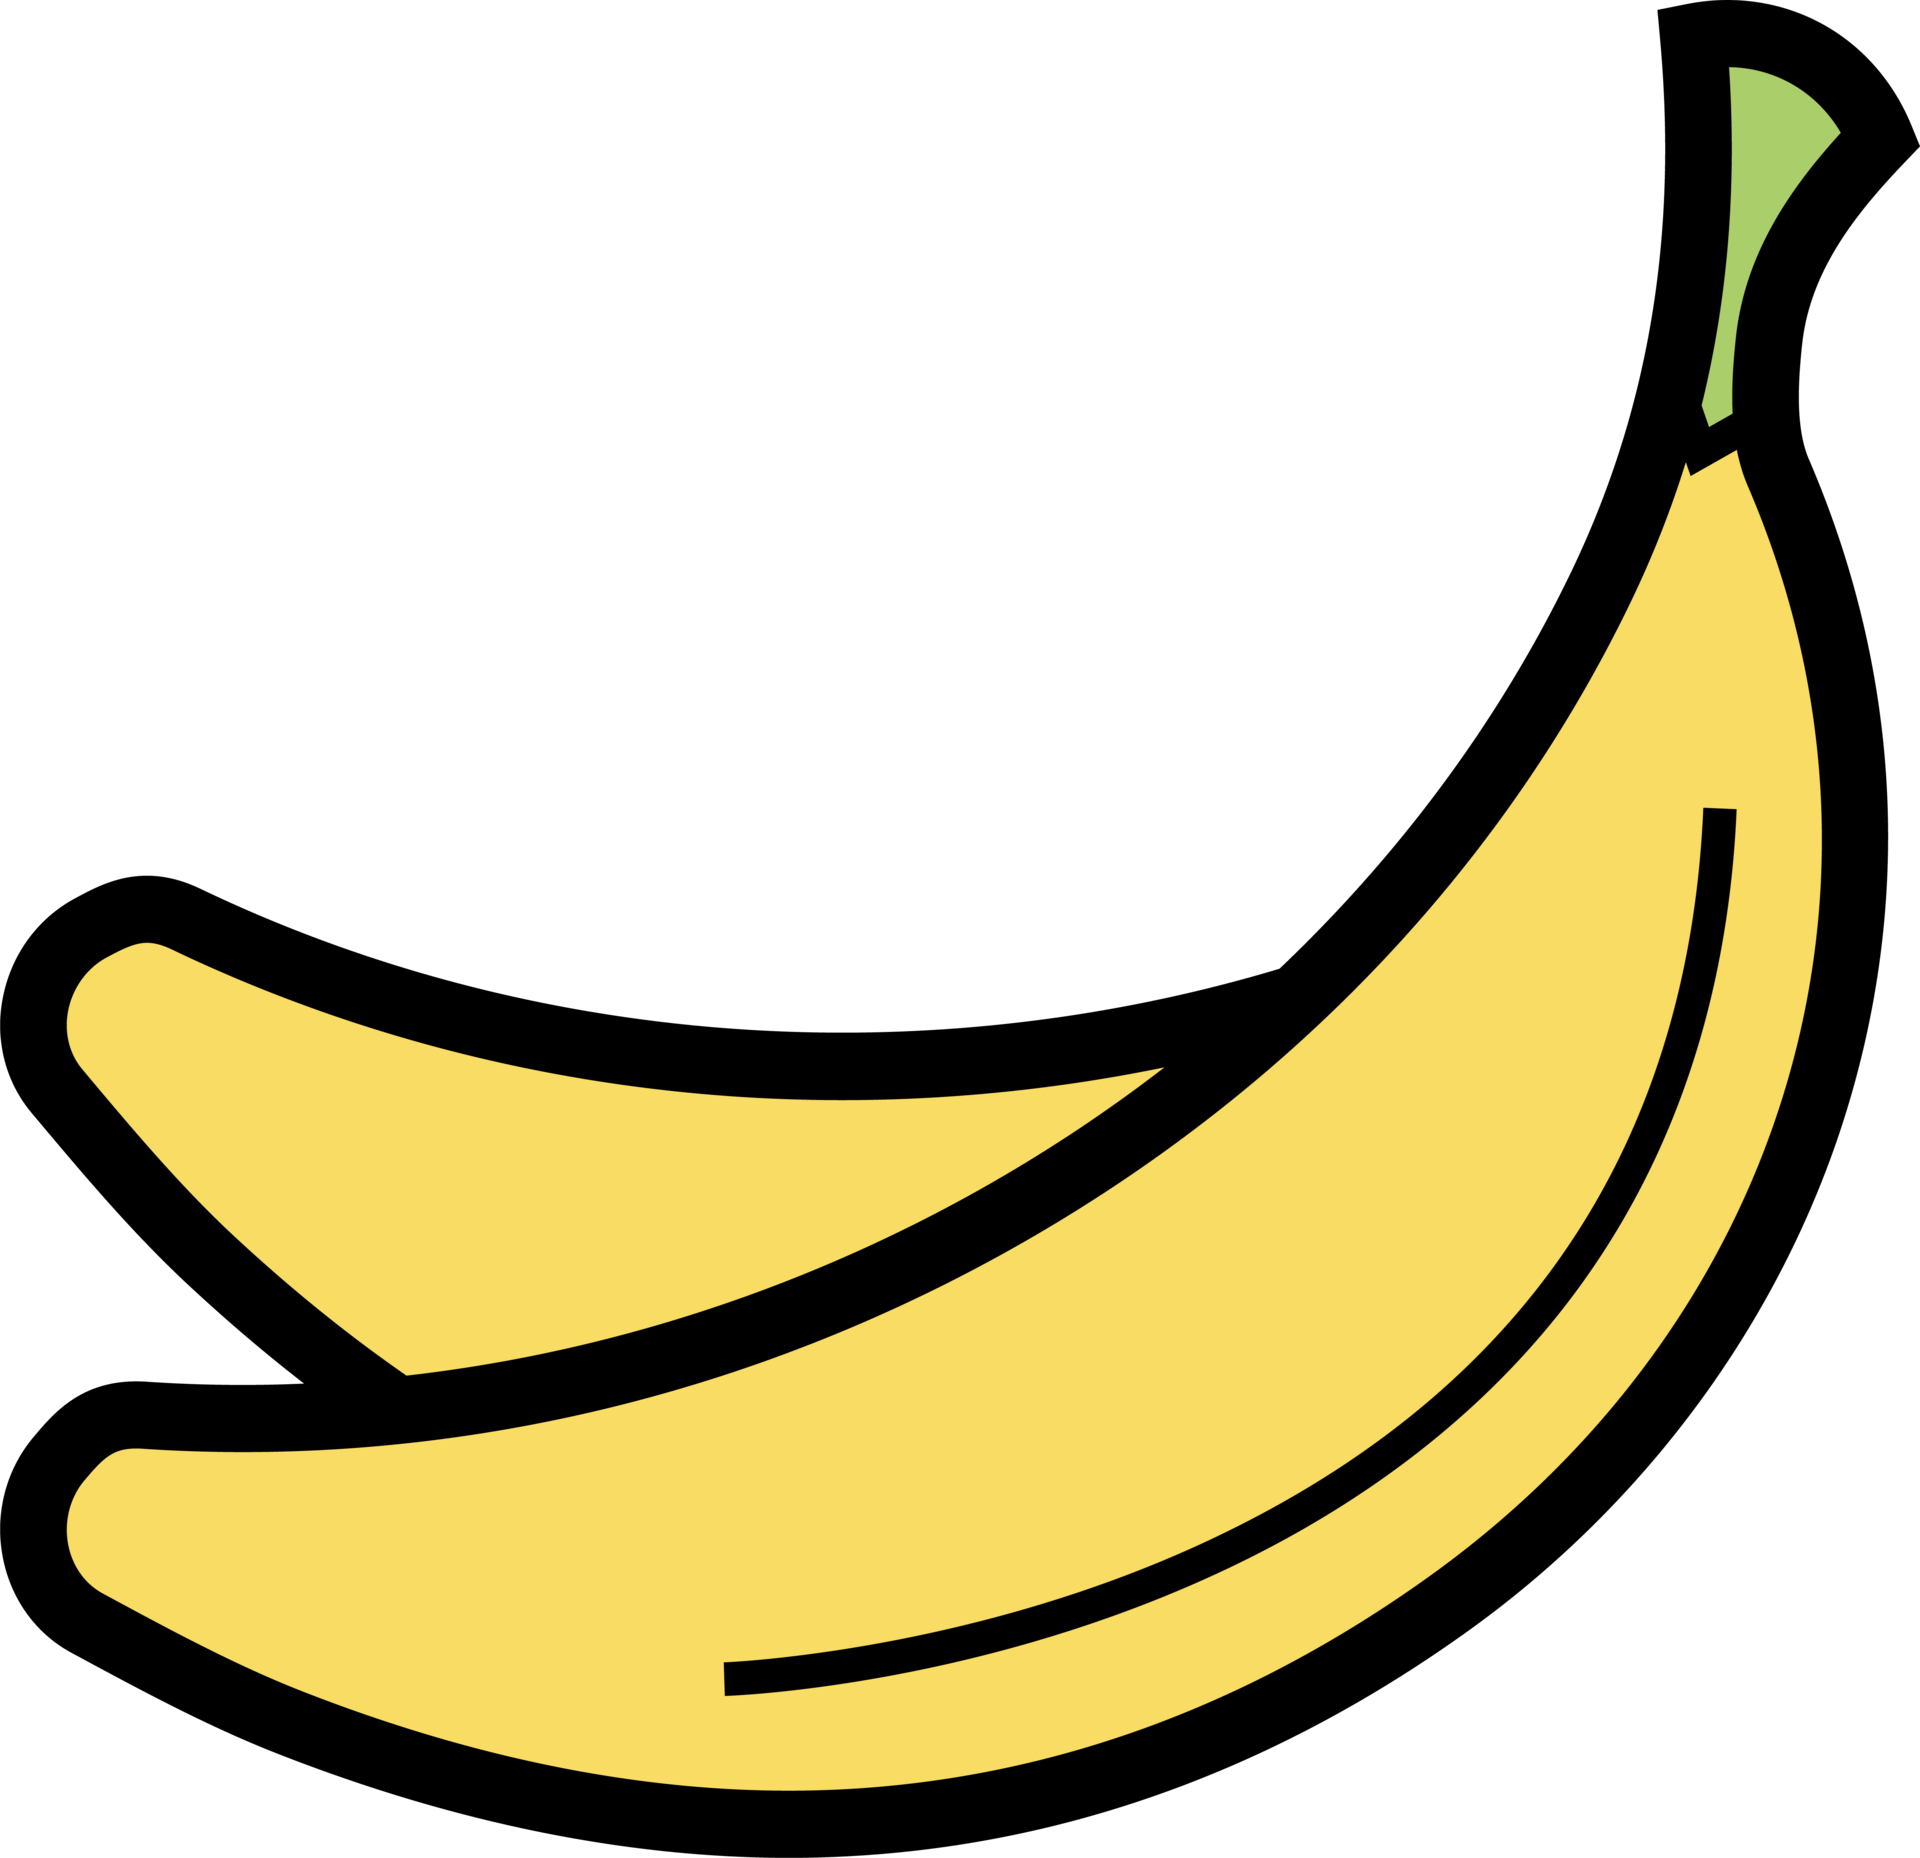 Banana Icon PNG Images, Vectors Free Download - Pngtree